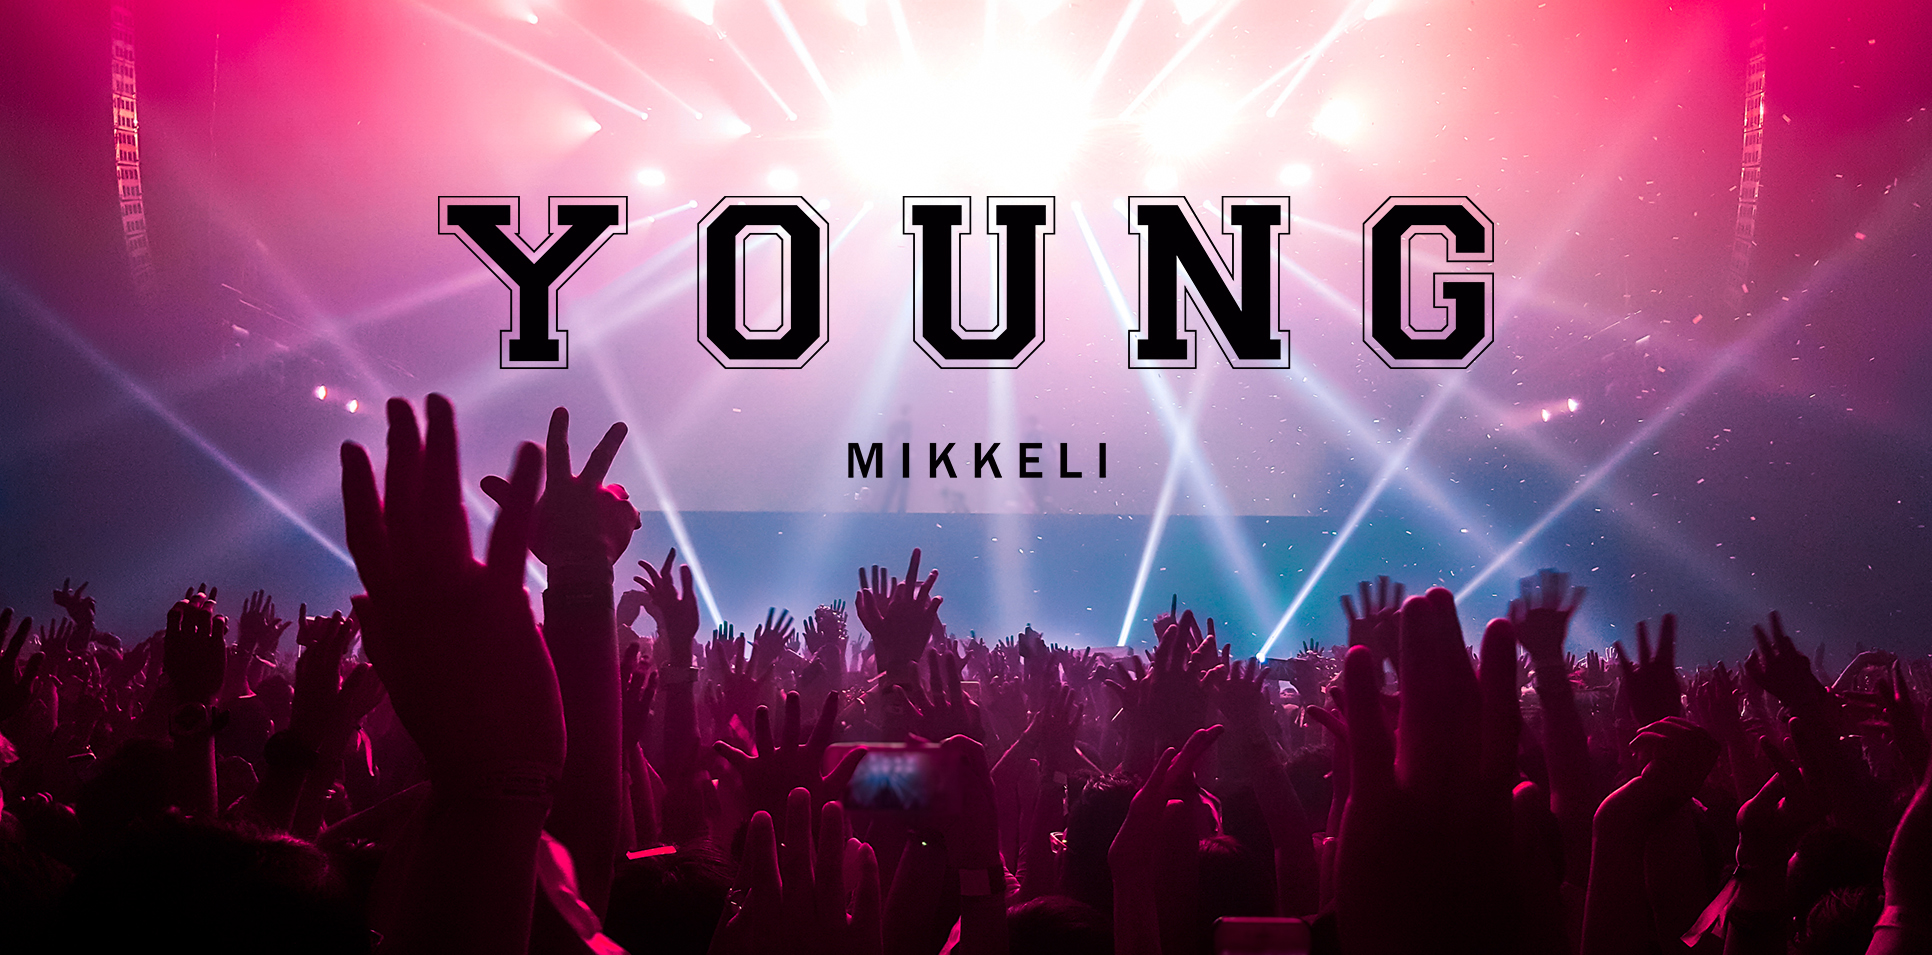 Crowd with hands in the air at a concert. Text Young Mikkeli.